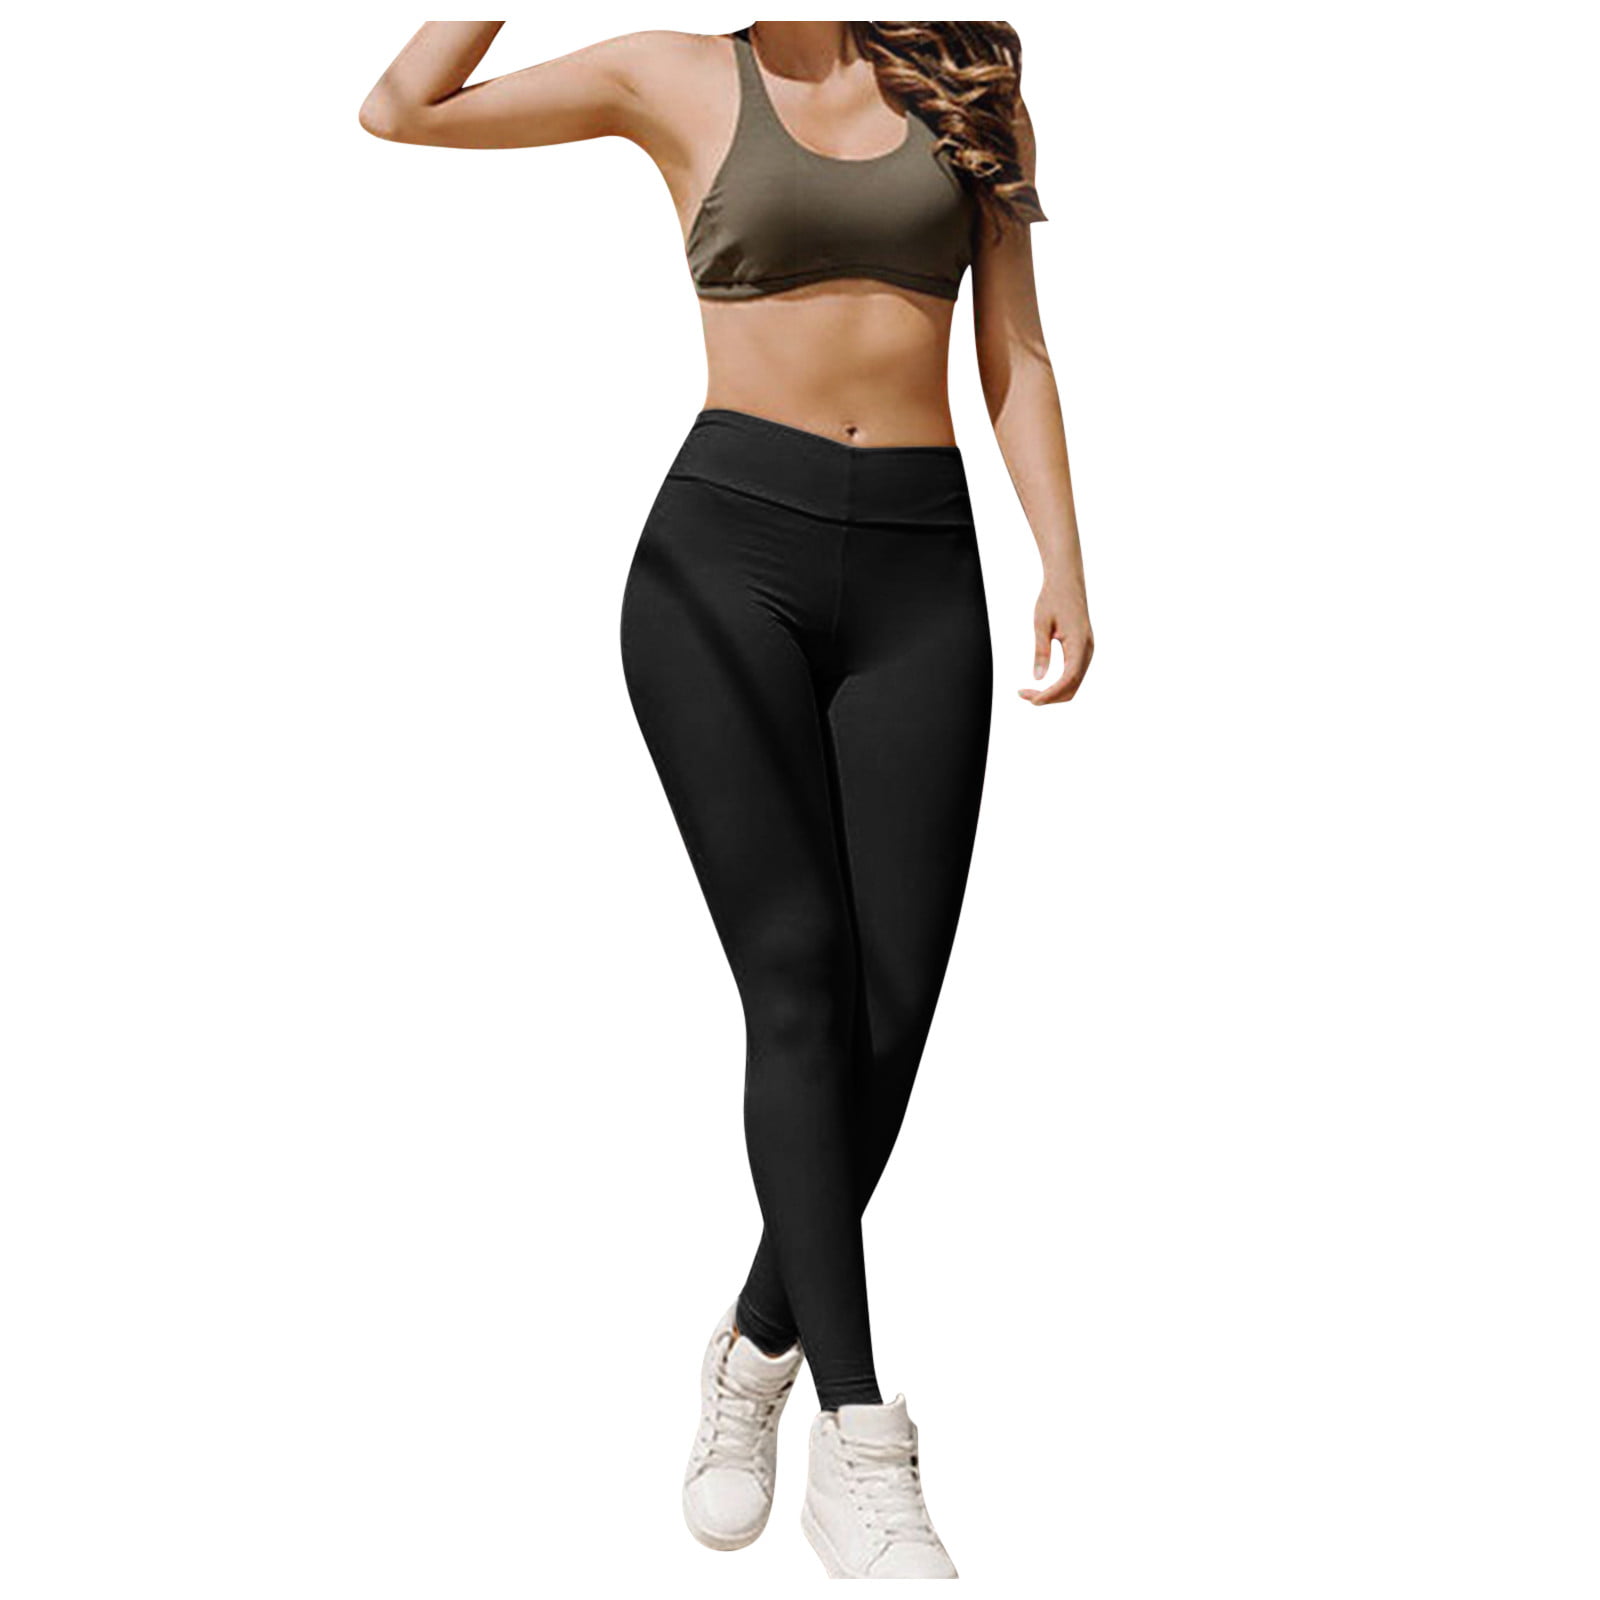 2023 Pants Women Yoga Pants With Pockets For Women Flare Leggings Bootcut  Thermal Pants For Winter From Li19830608, $19.46